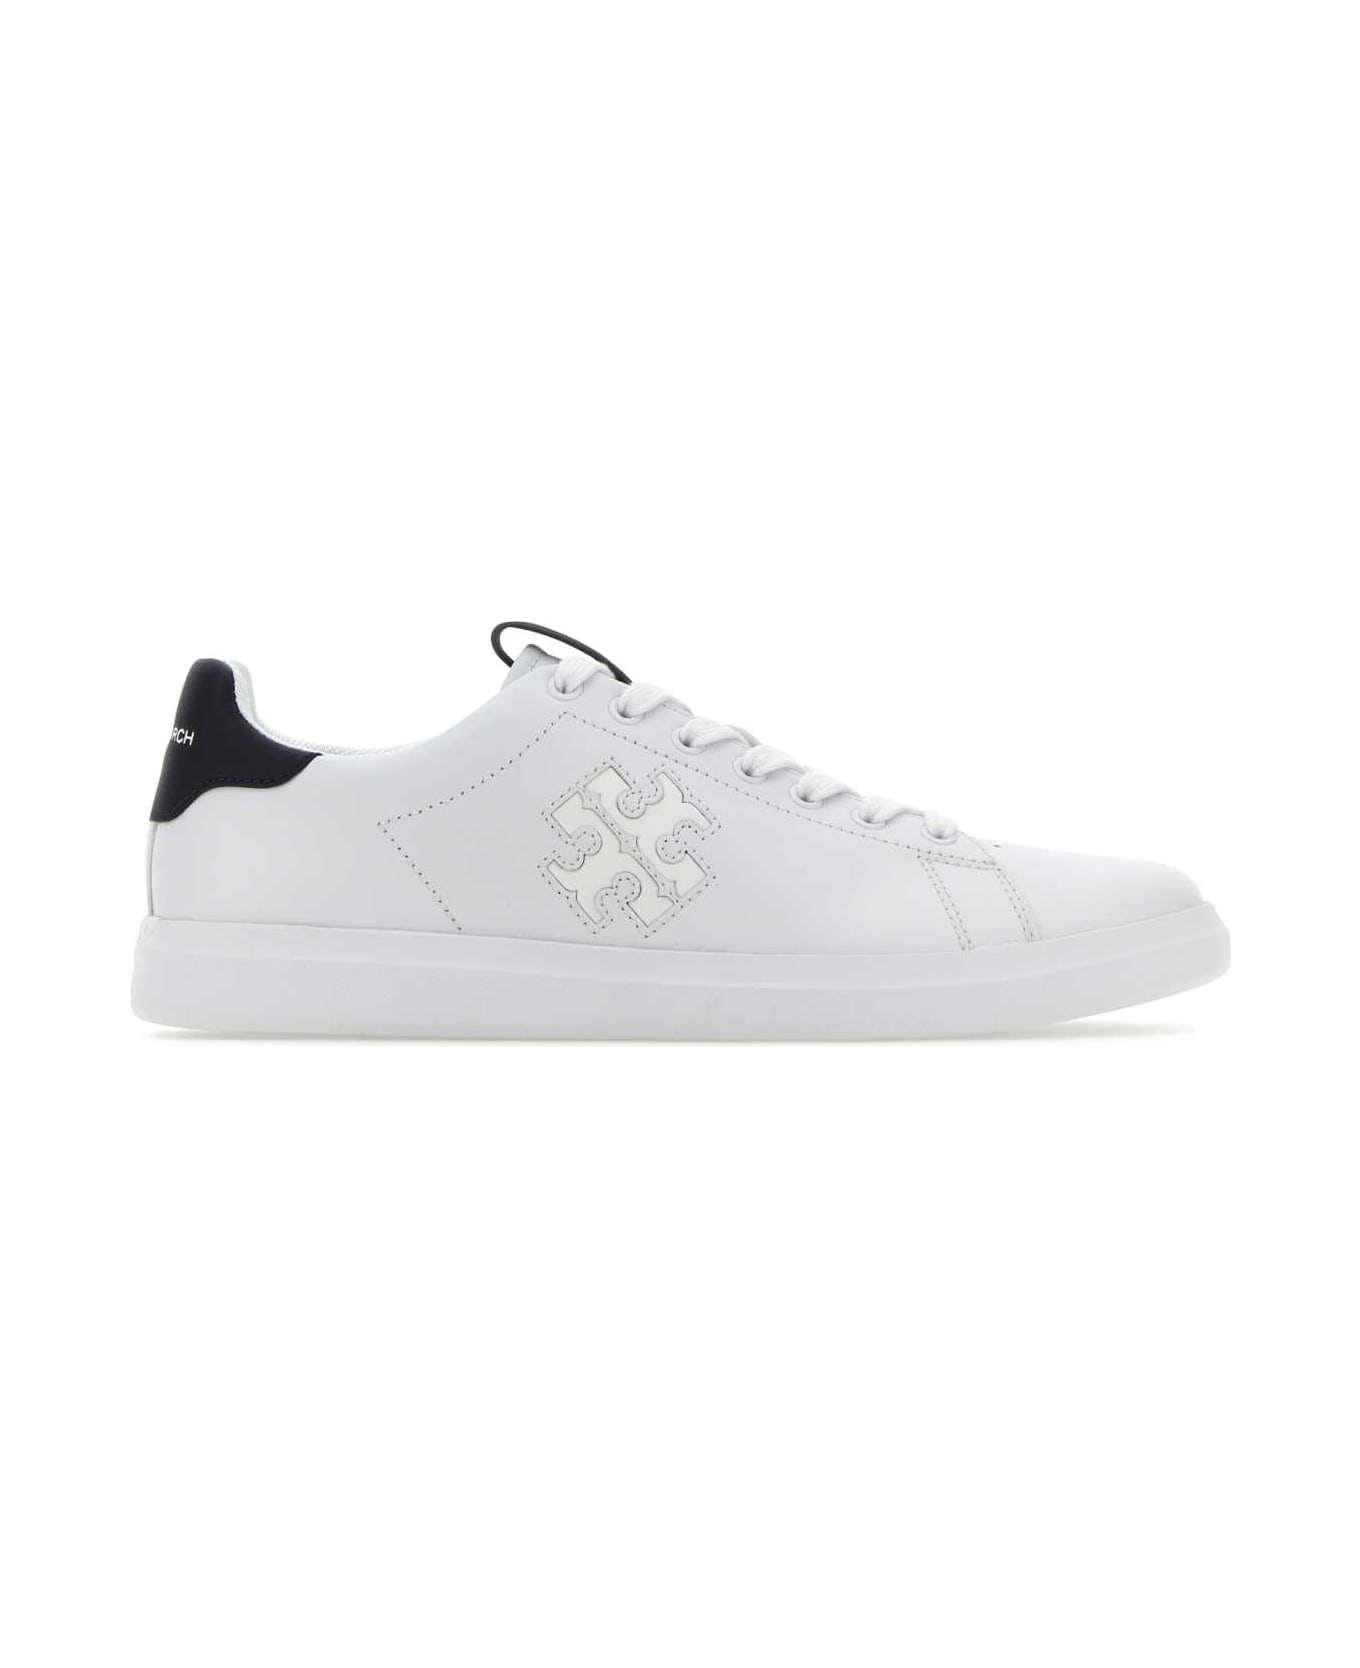 Tory Burch Chalk Leather Howell Court Sneakers - WHITEPERFECTNAVY